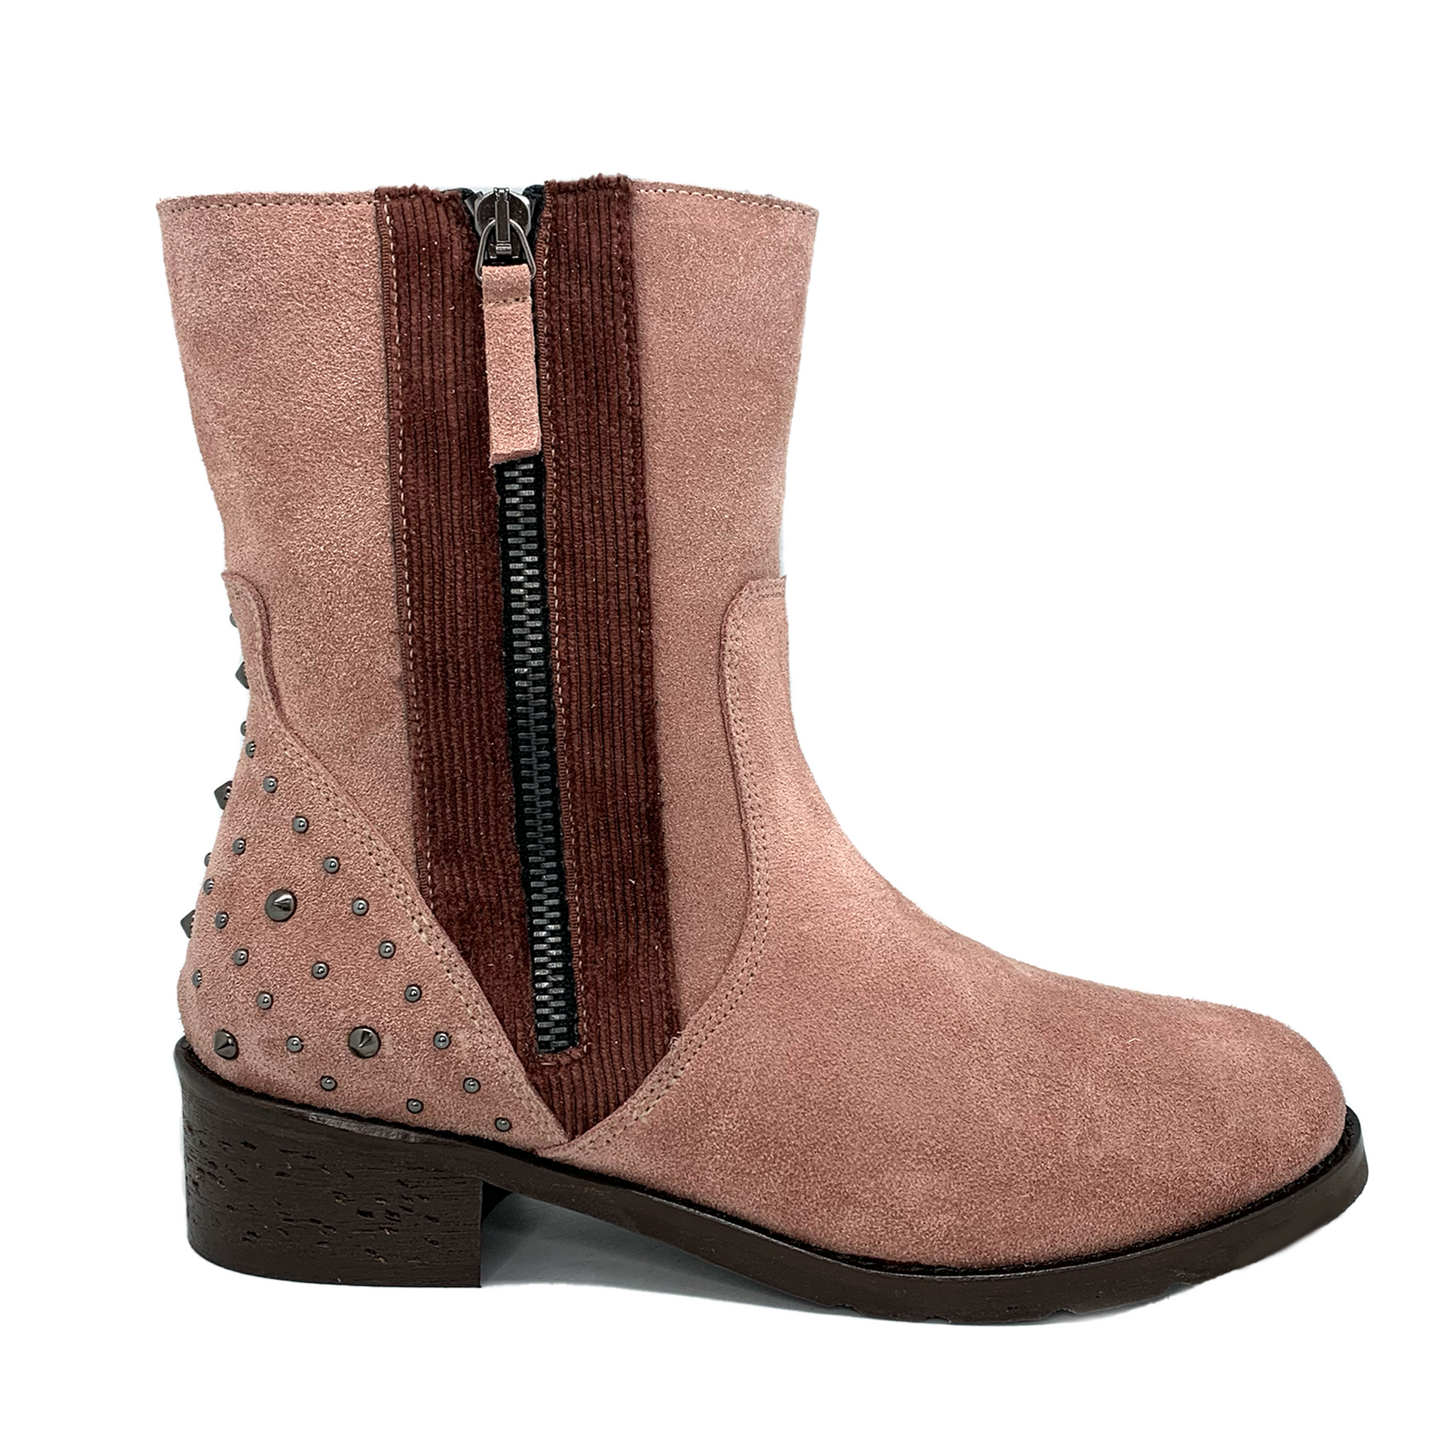 A pair of Designer Boots named Mes Amie Blush, brown ankle boot